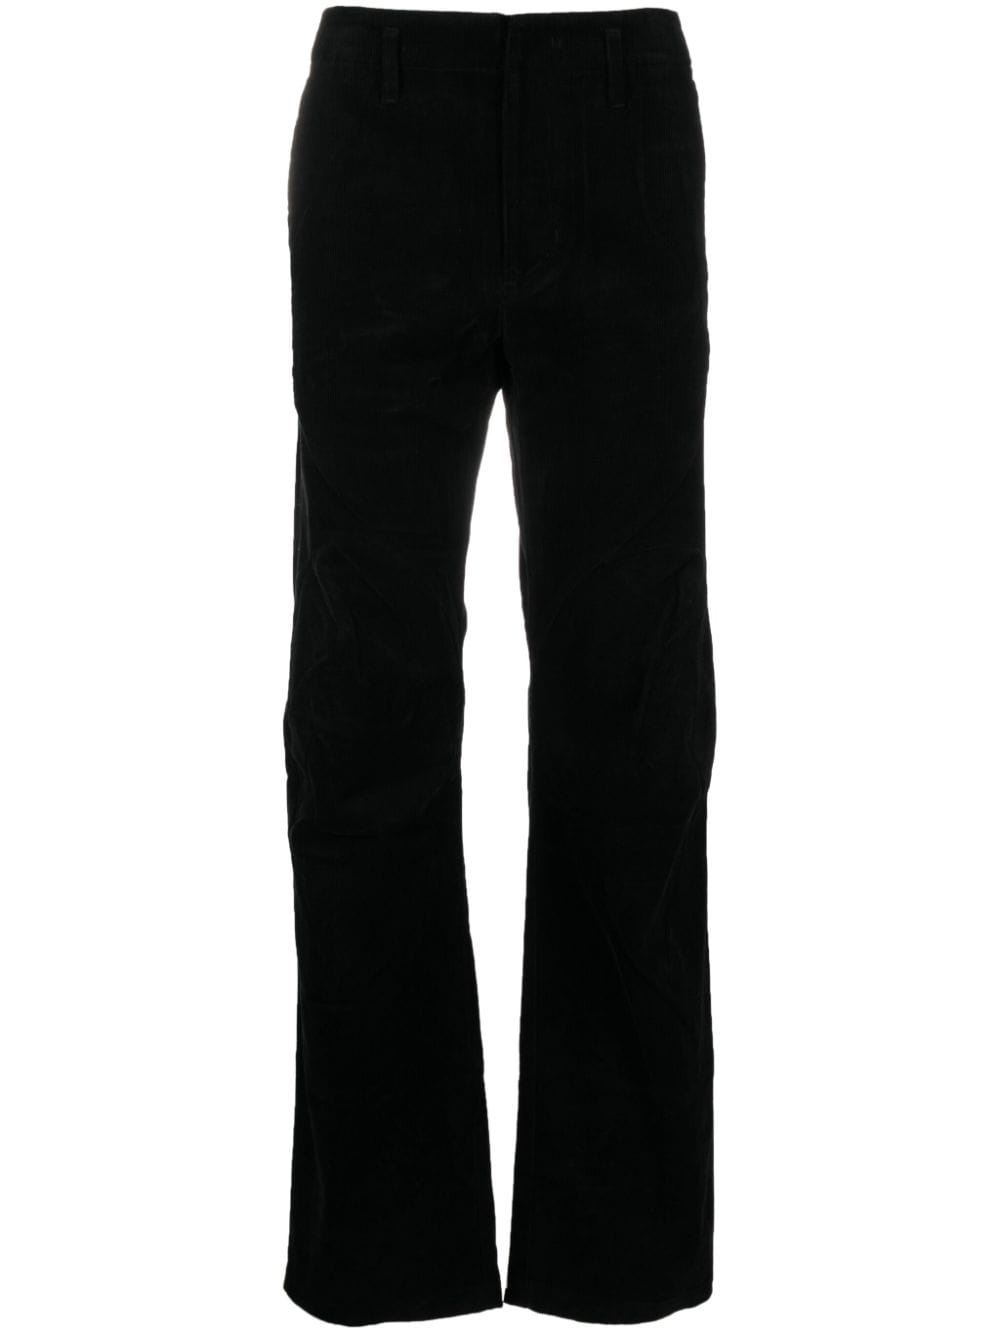 Right corduroy cotton trousers - 1